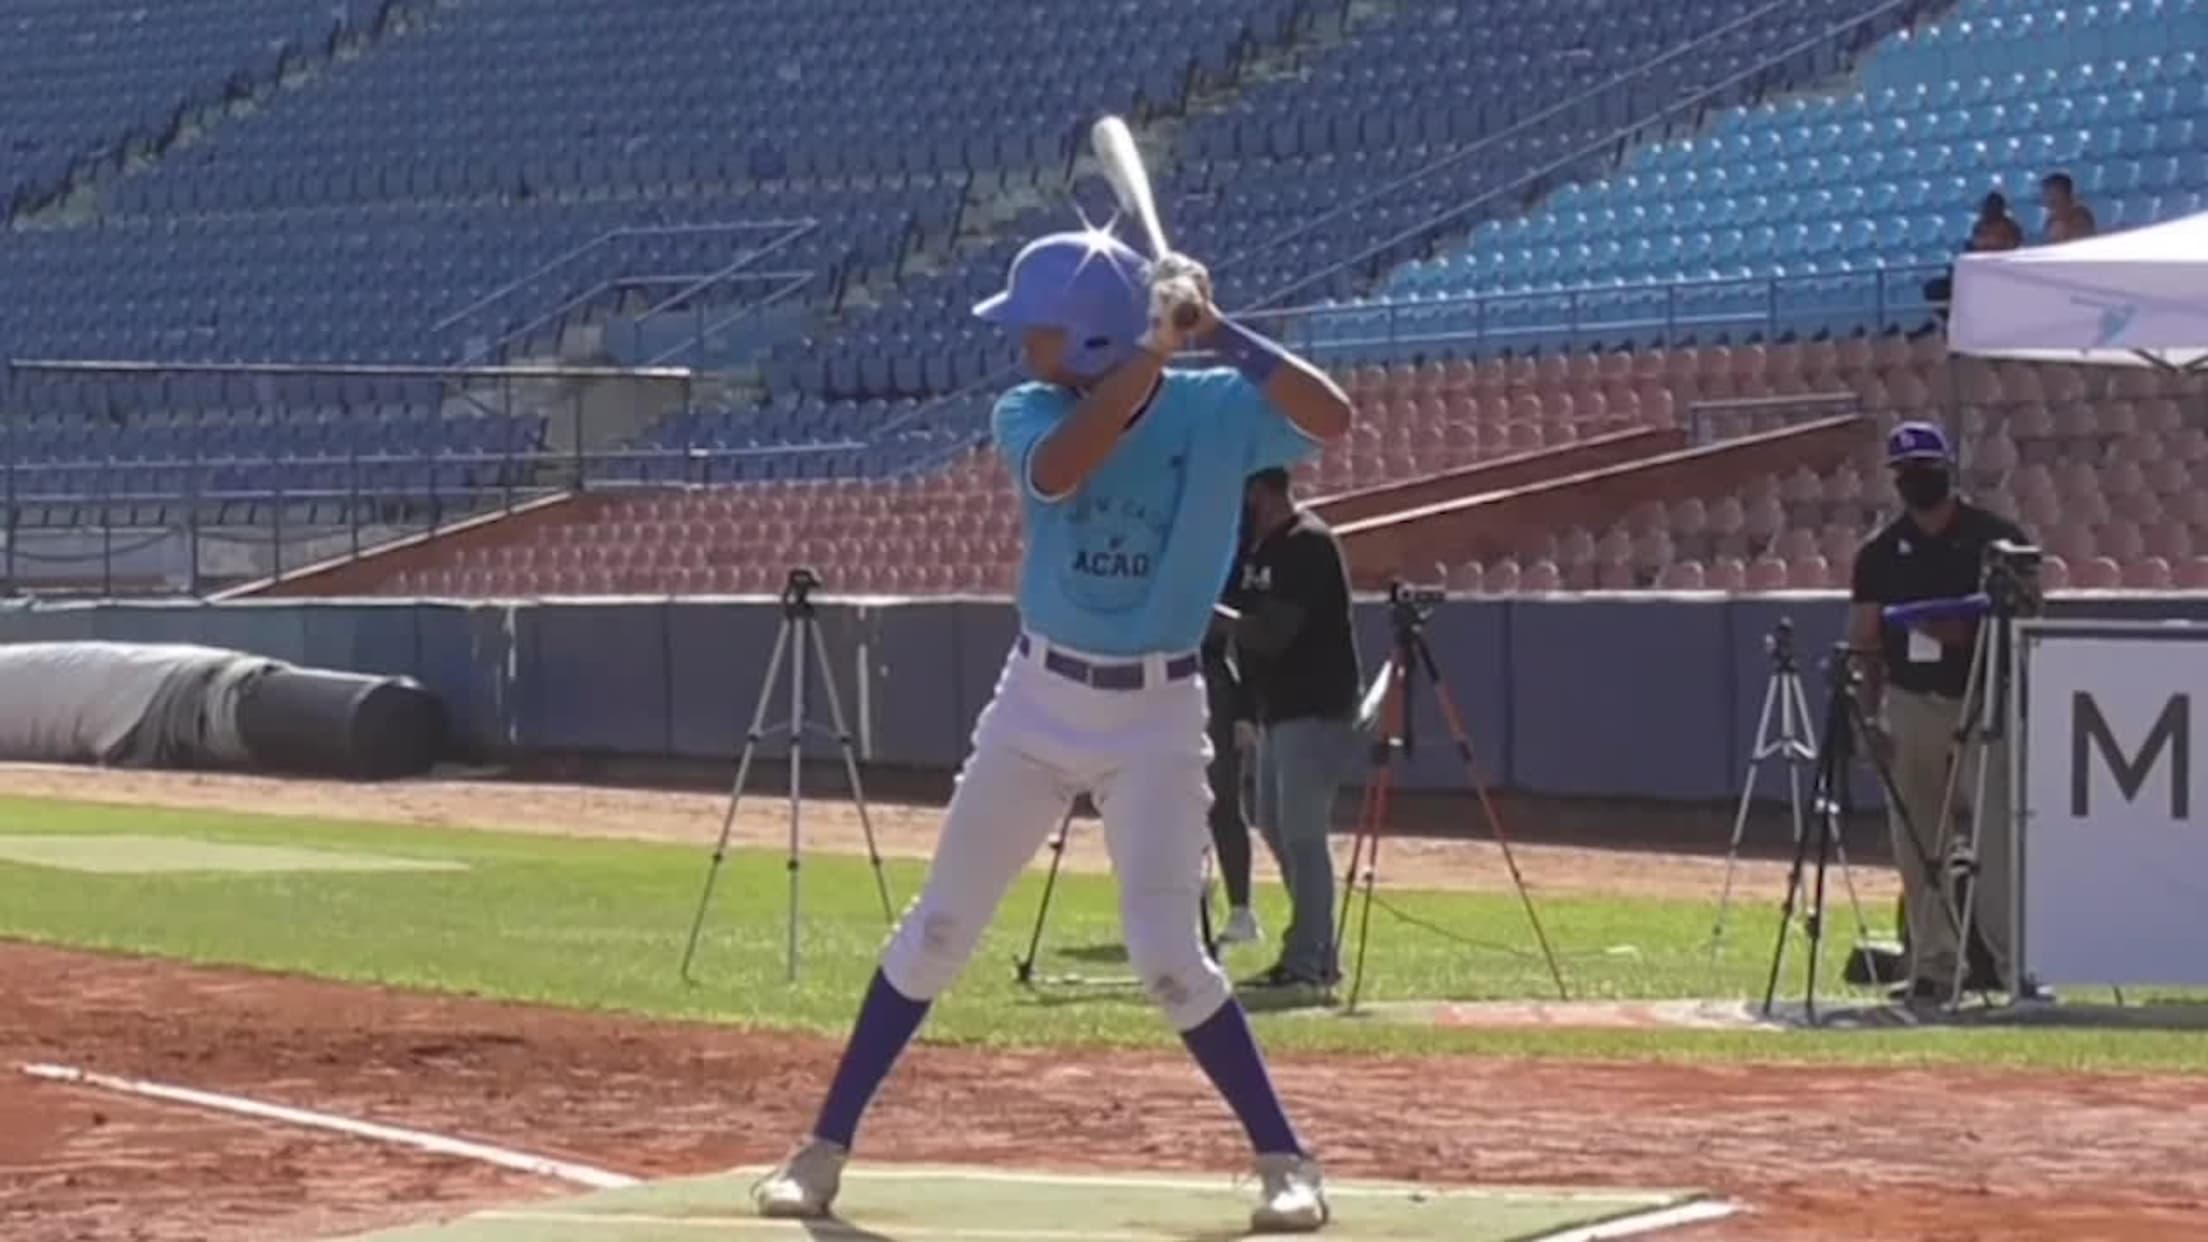 Top Int'l Prospects: Ramos, OF